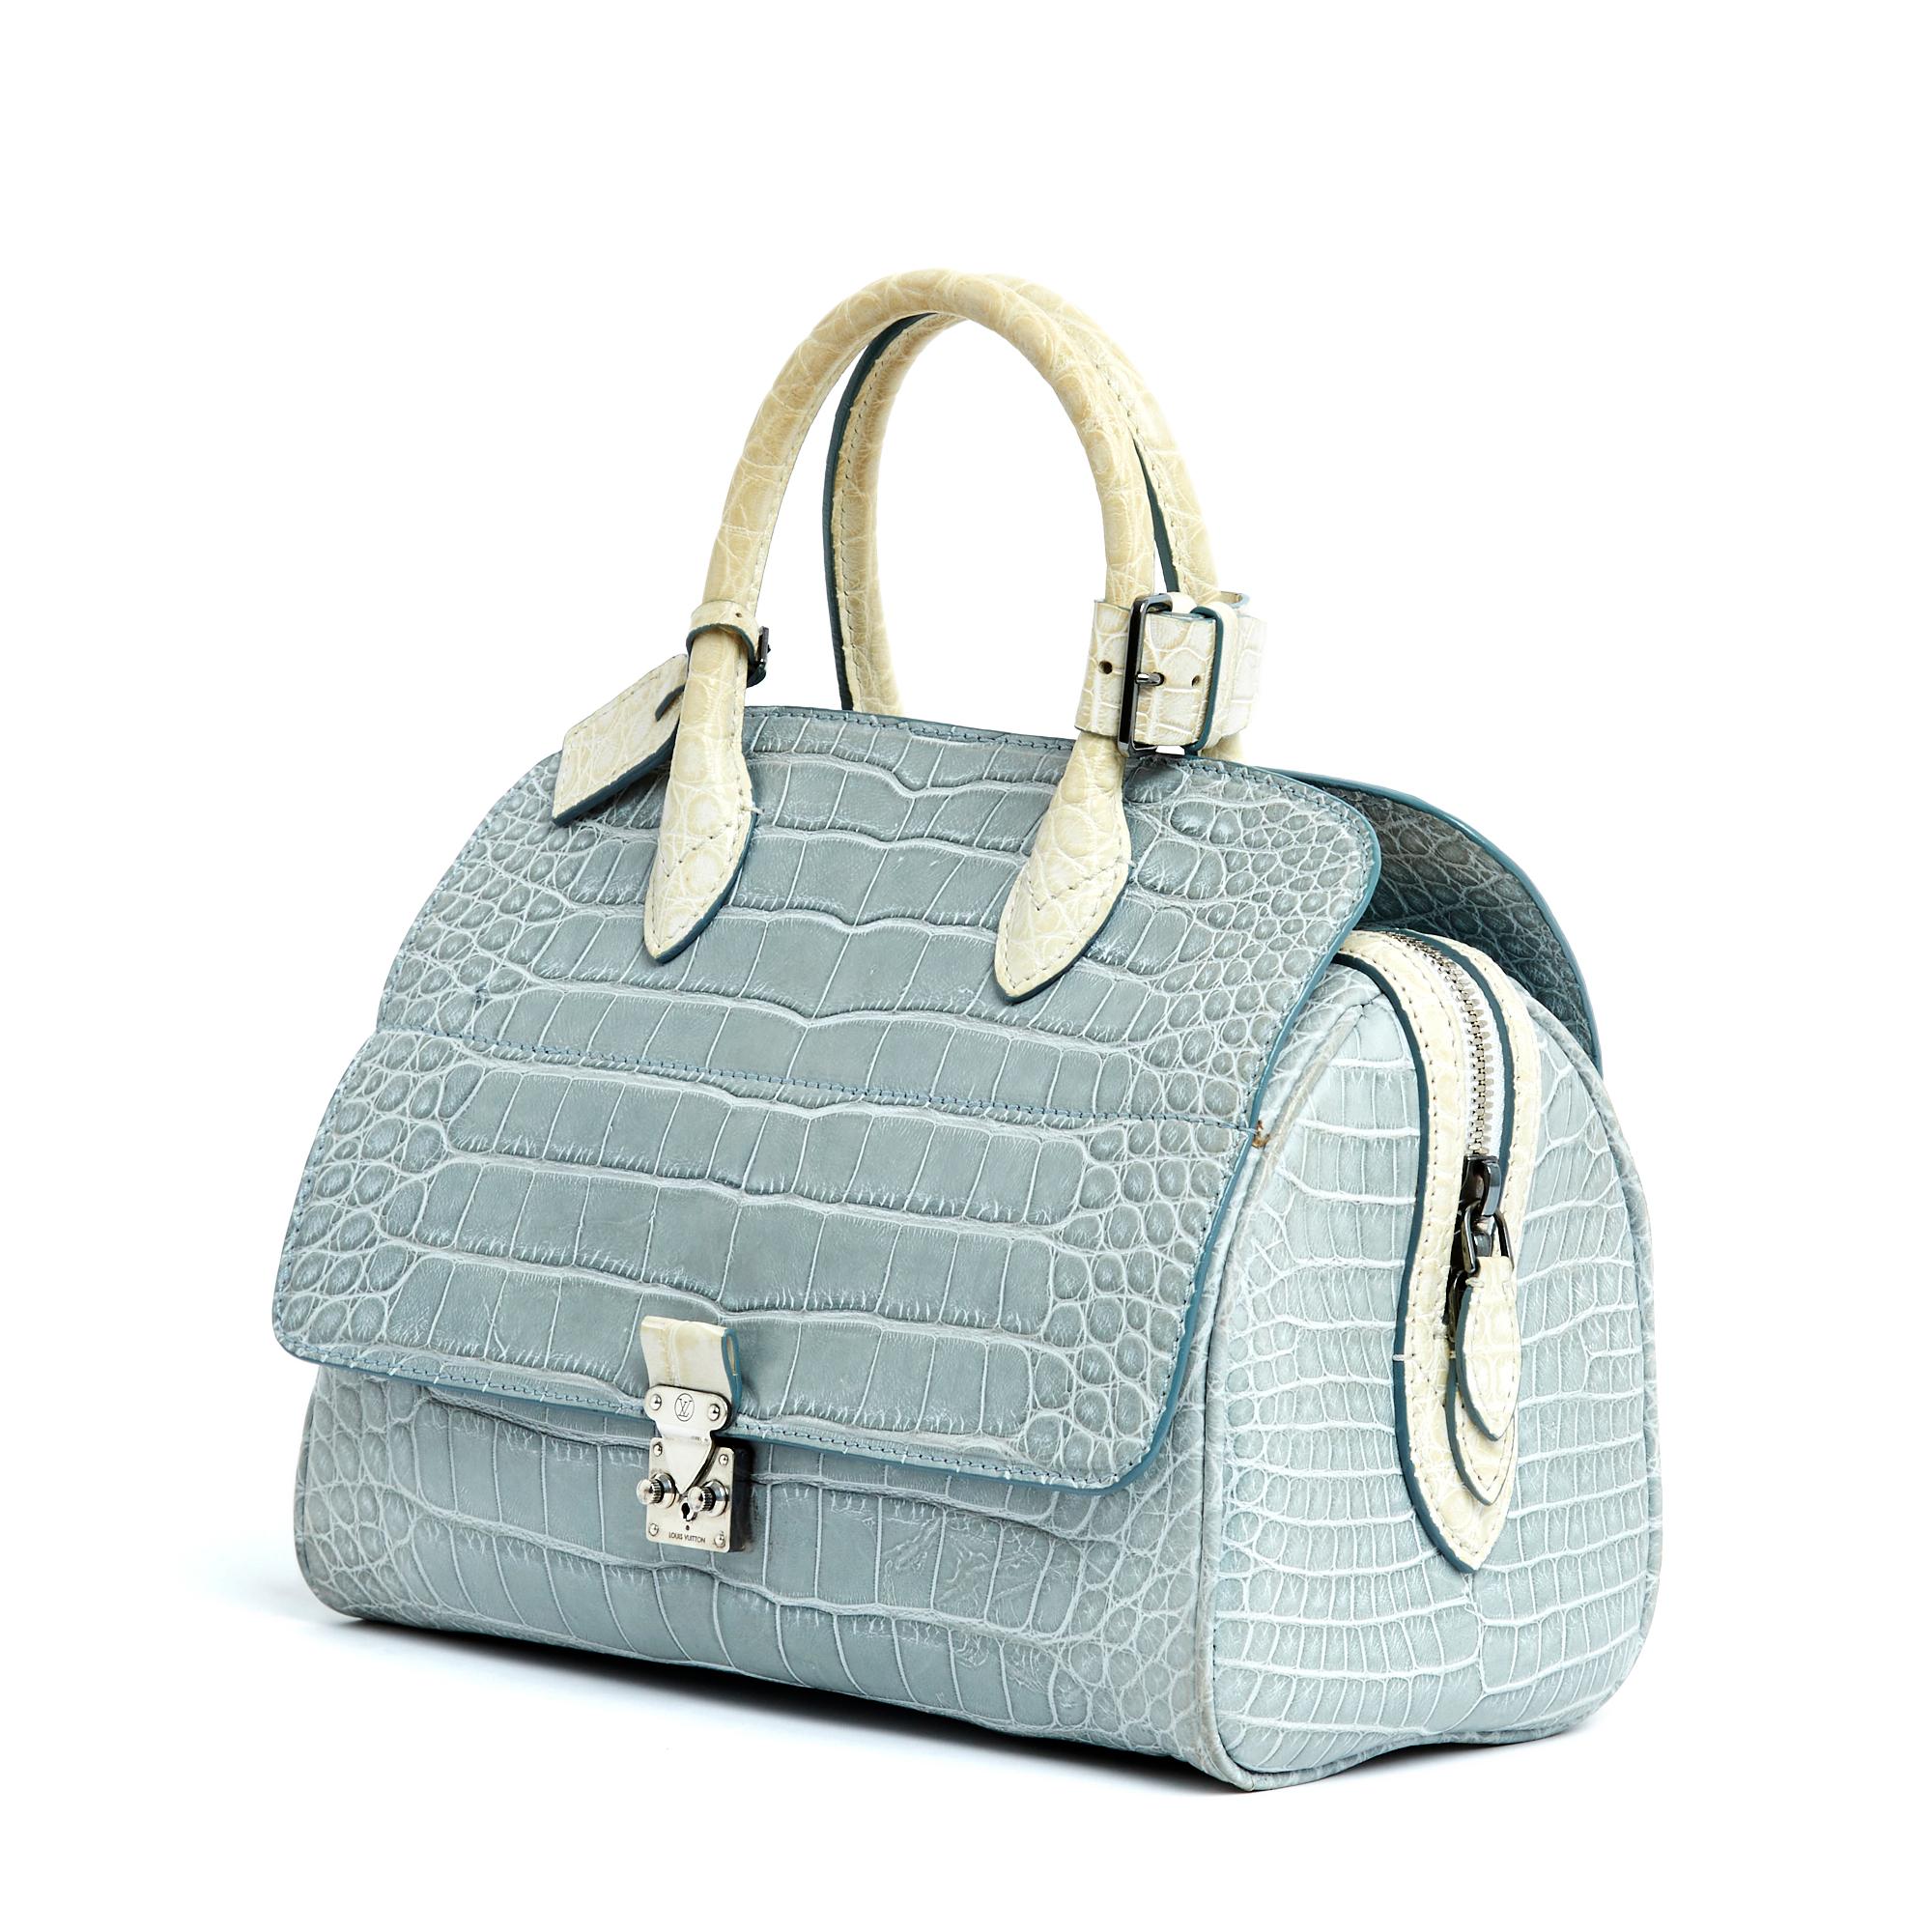 Louis Vuitton Old Speedy Flap model bag from the Les Extraordinaires 2012 collection sold in a very limited edition (3 colors, 10 of each color), in soft exotic leather in light blue color (